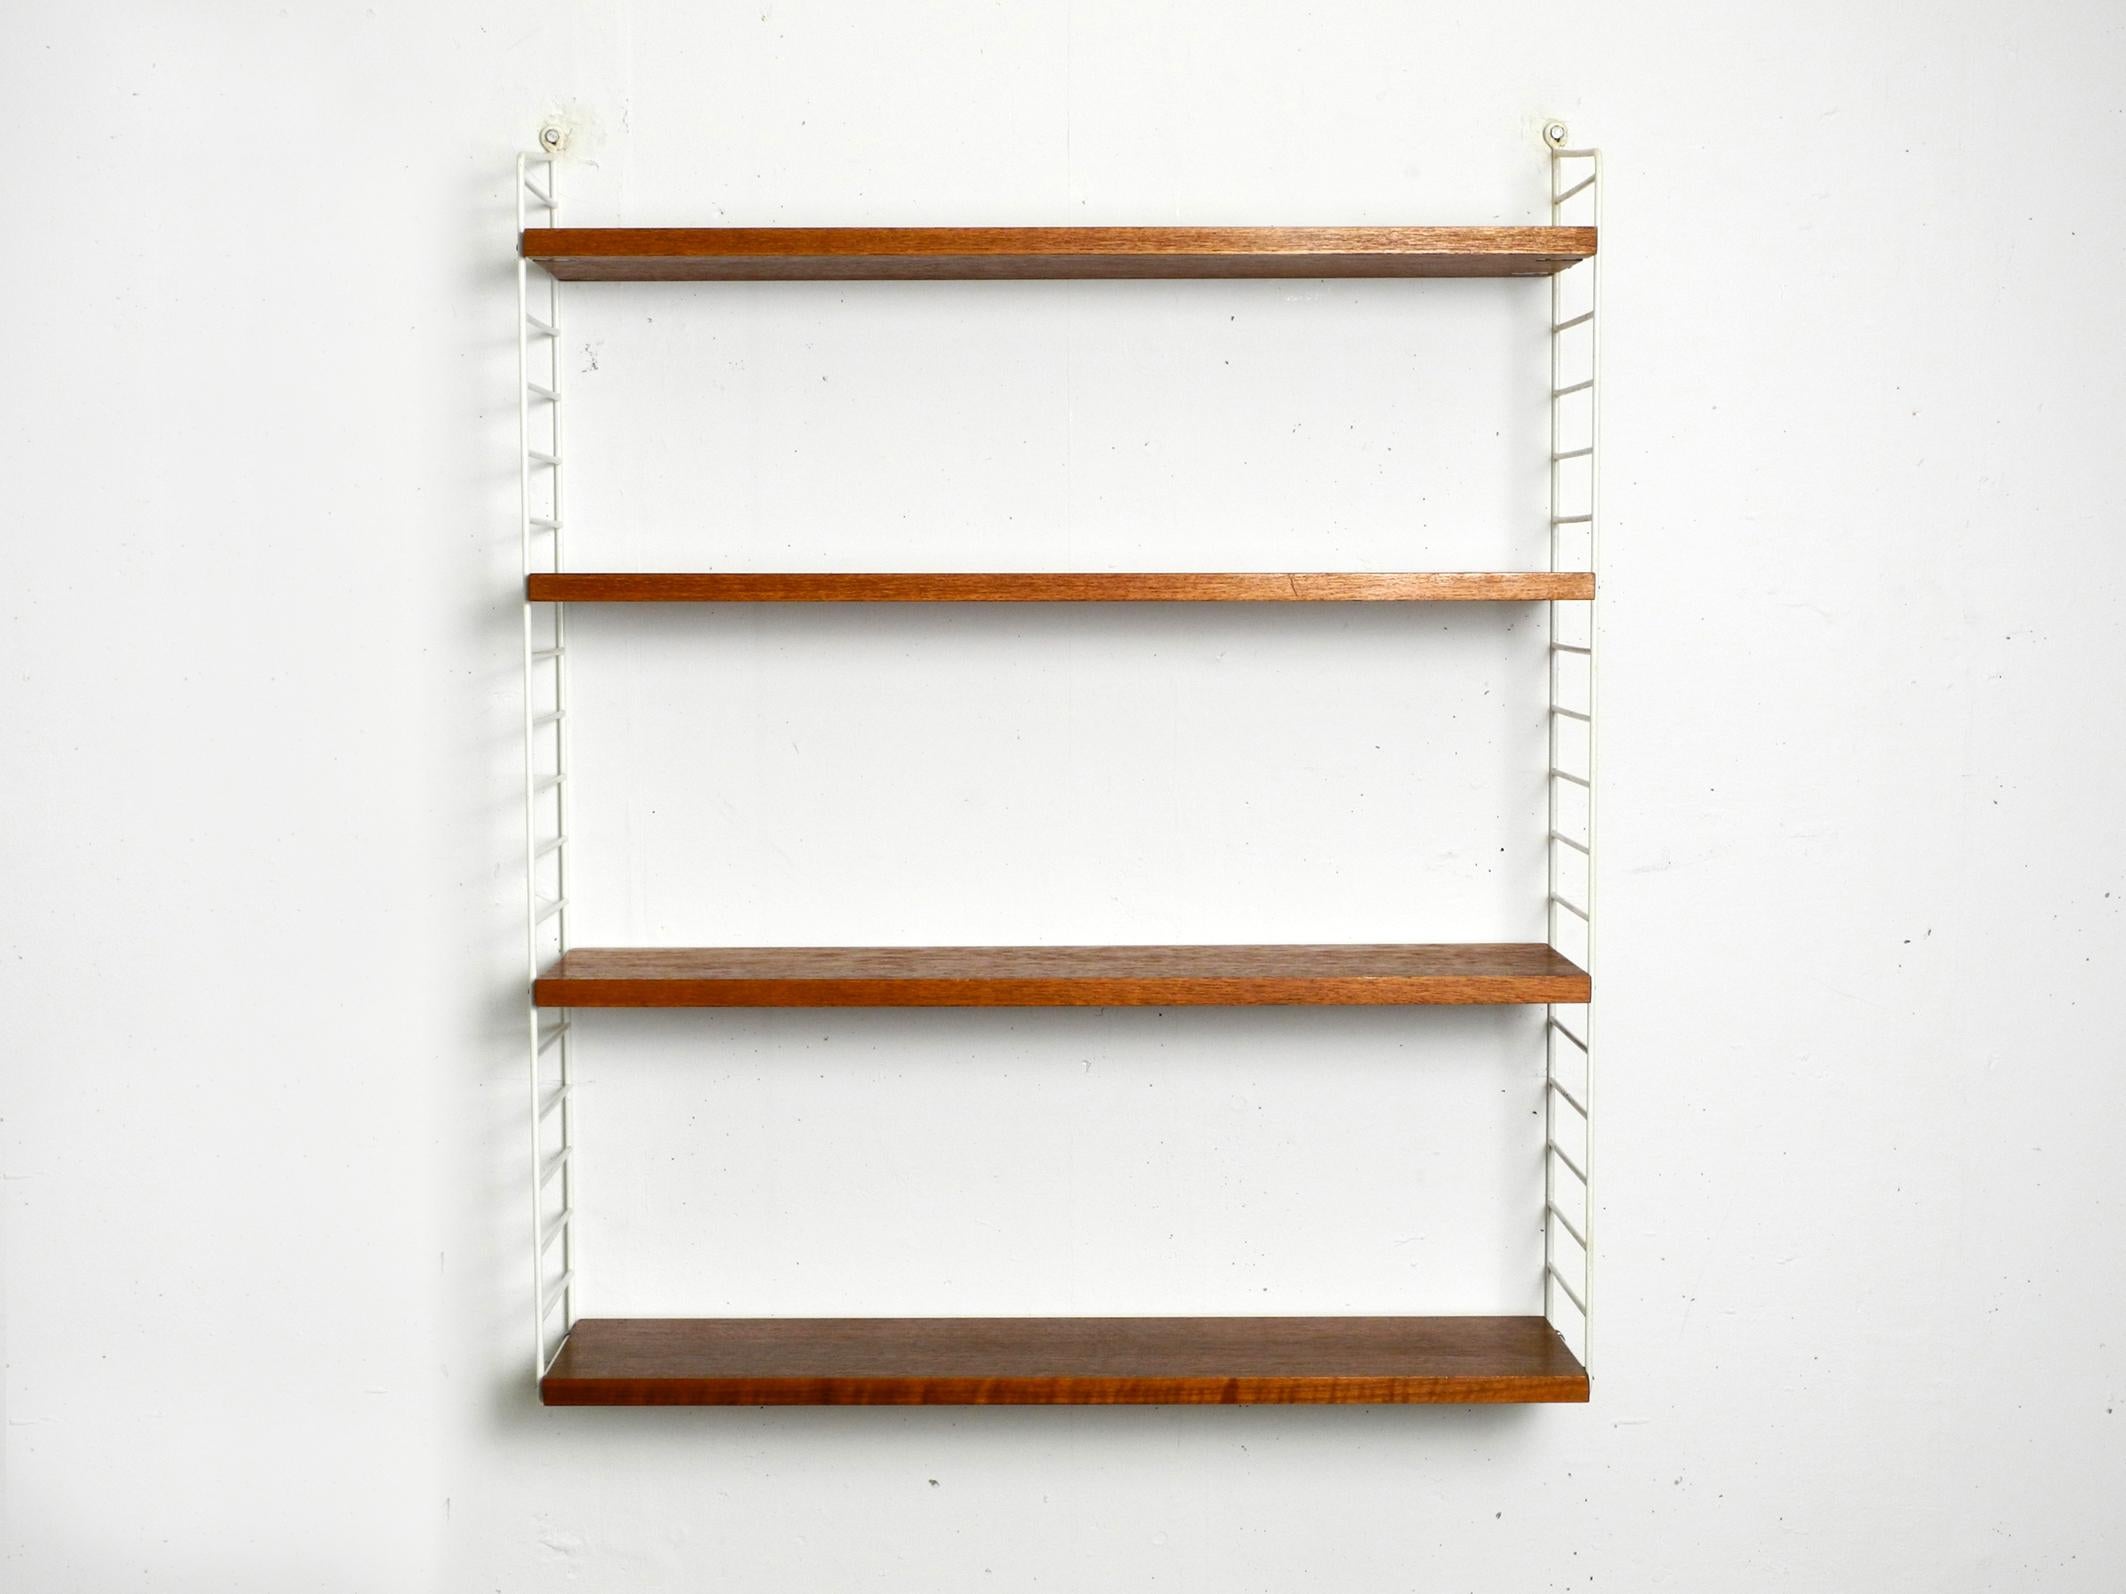 Original 1960s Nisse Strinning wall hanging shelf with four solid wood shelves with teak veneer.
2 metal ladders with plastic coating in white.
Both ladders are in good condition. No rust. The plastic coating is still good.
Good vintage condition.